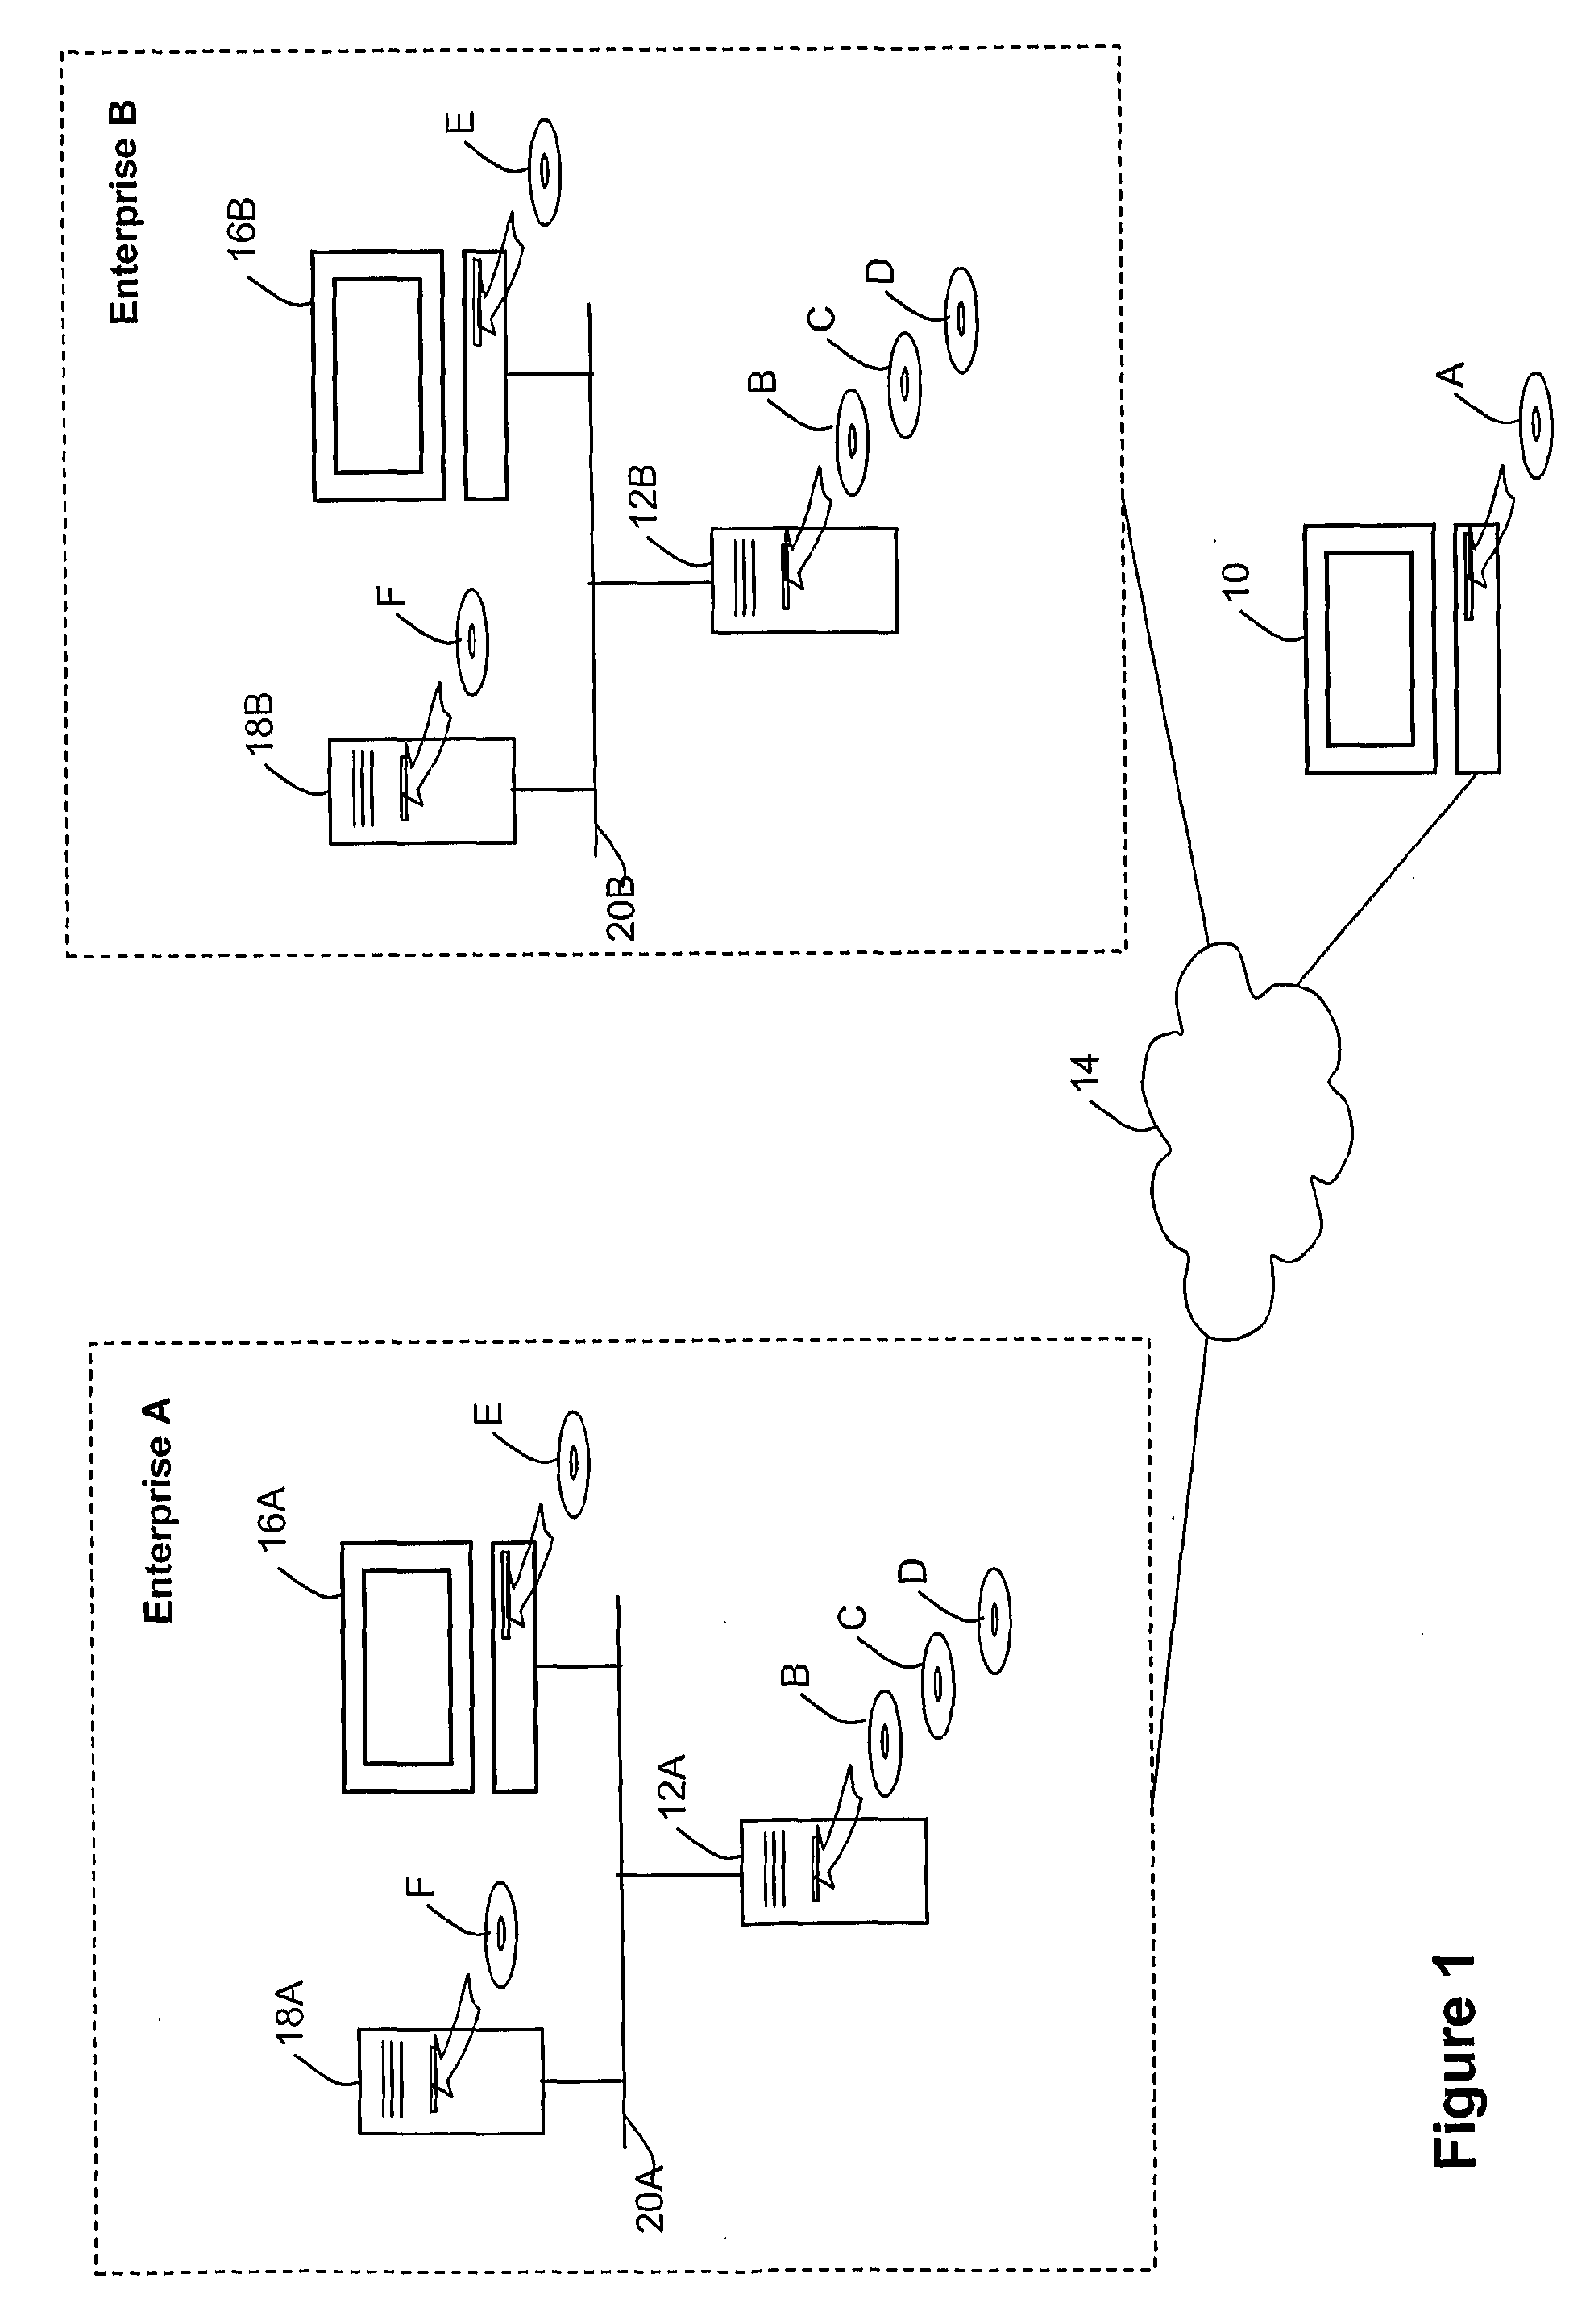 Distributed computing network using multiple local virtual machines